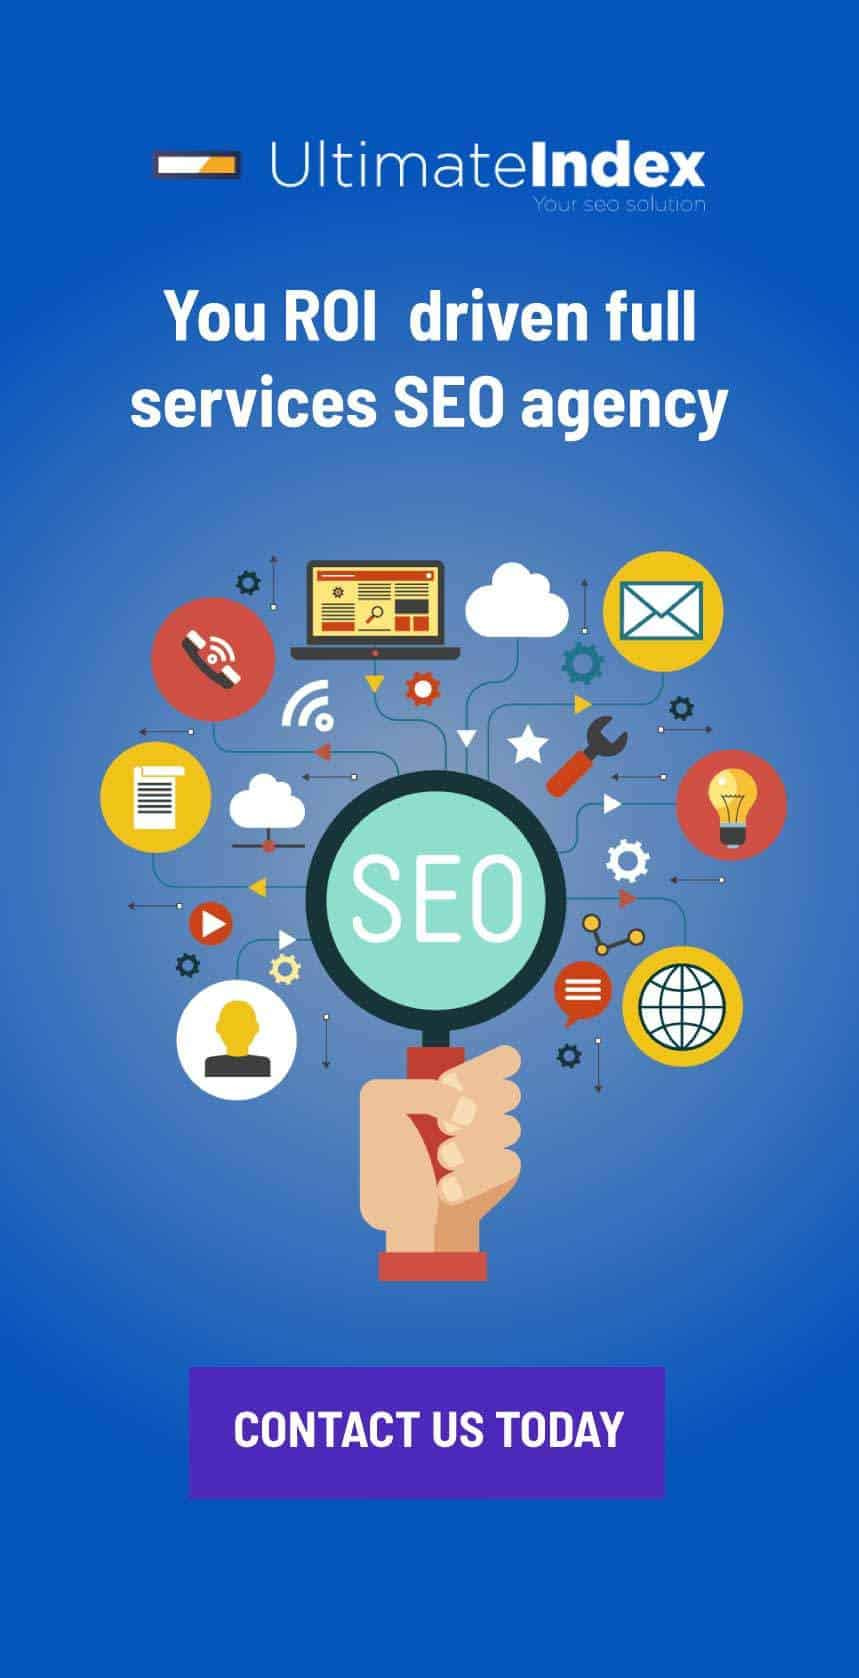 Ultimate Index - Your ROI driven full service SEO - SEO in 2019 - 3